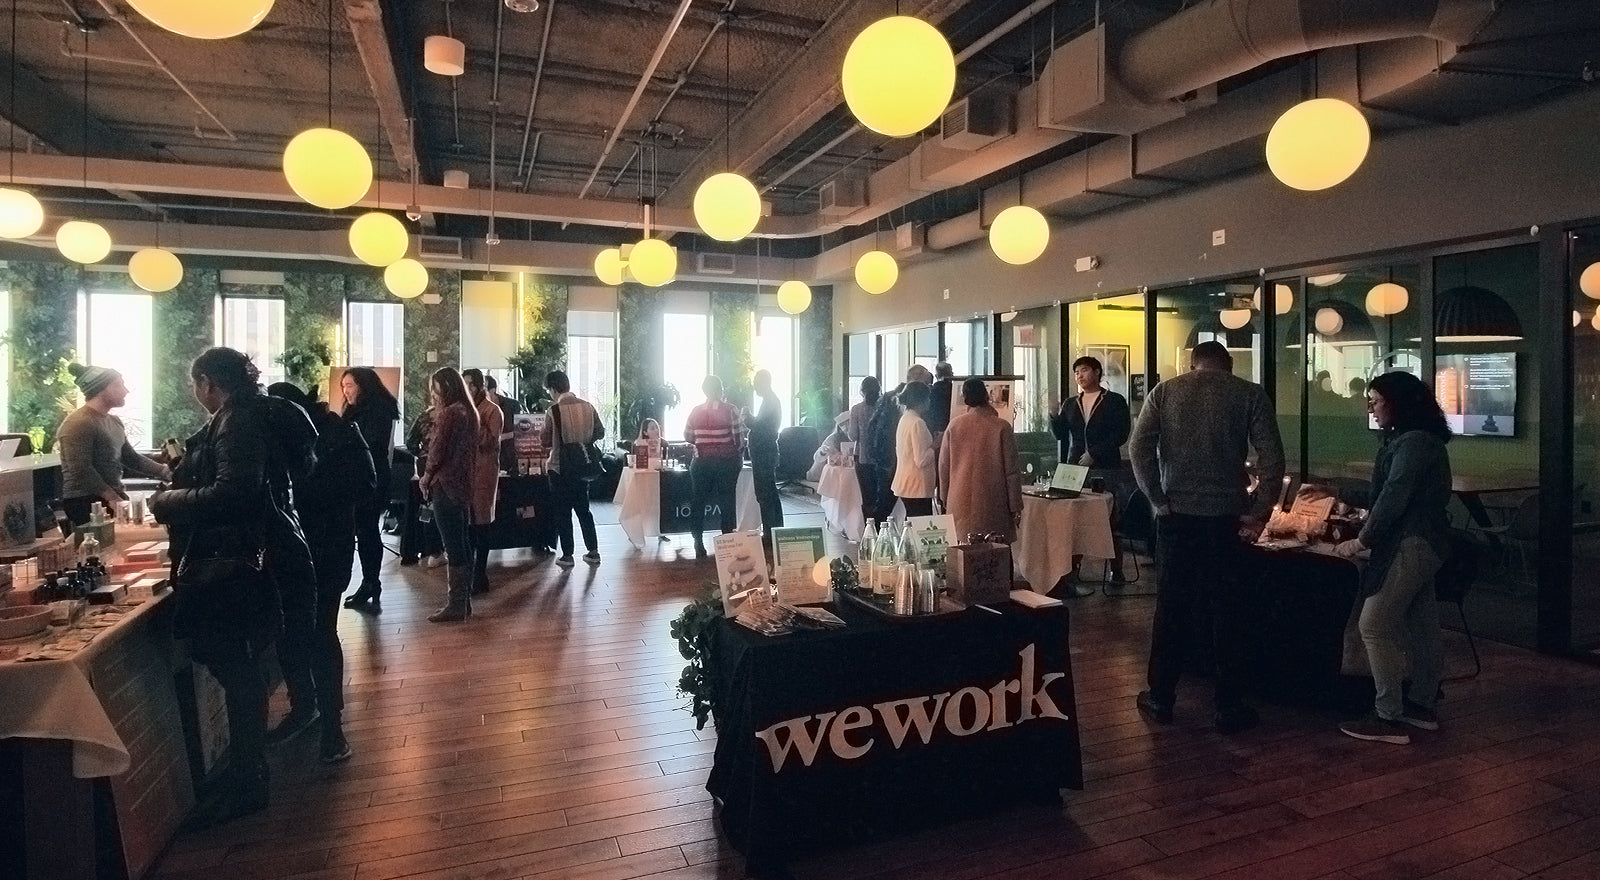 WeWork 85 Broad st. Wellness Fair January 15th, 2020 - 12-3pm on 27th Floor Commons